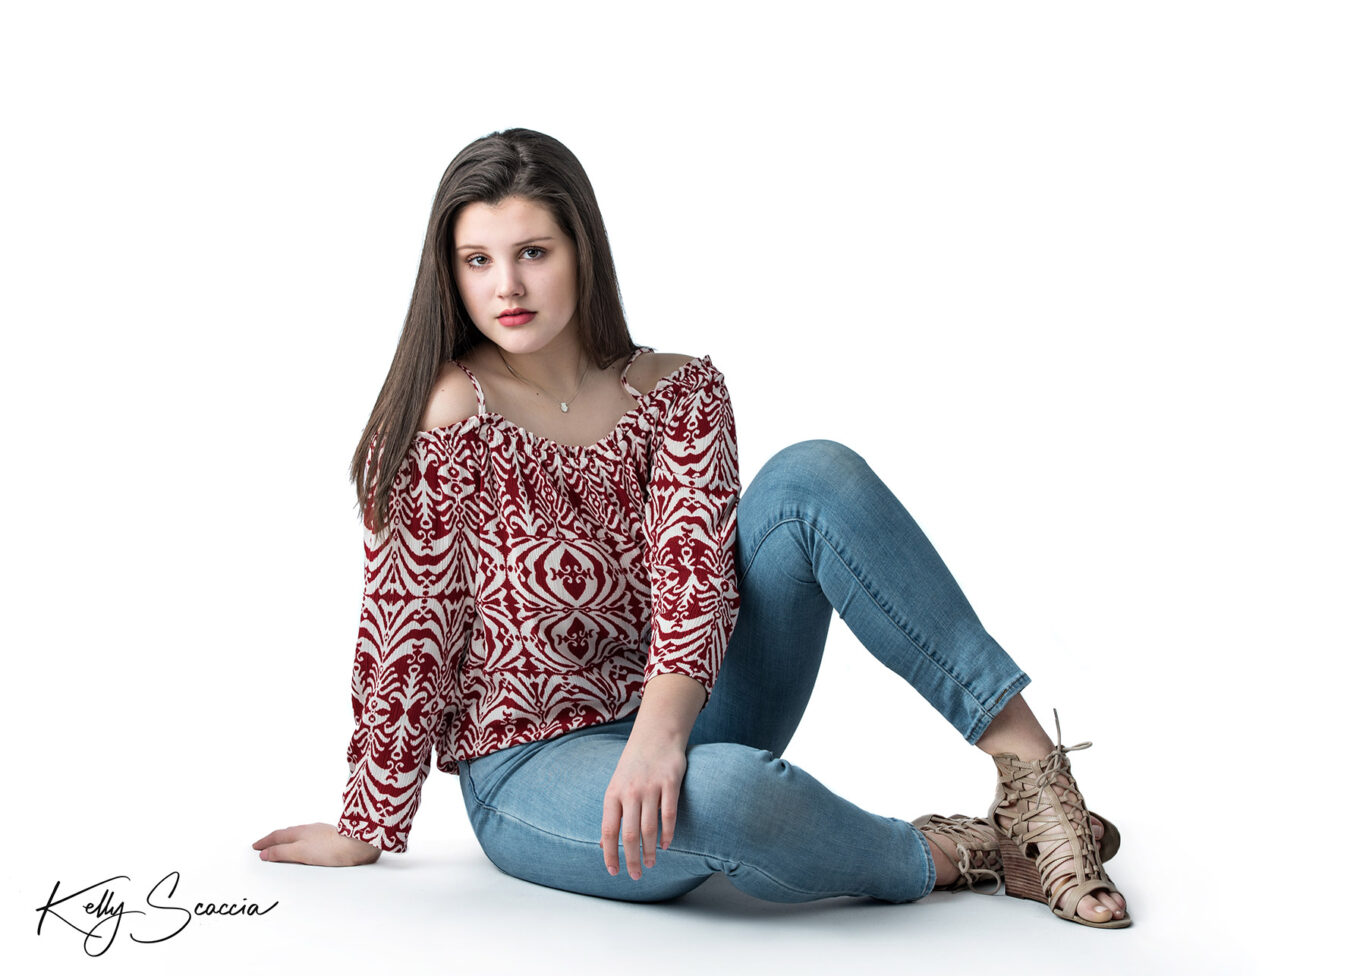 High School senior girl on white background sitting on hip with hand in lap looking directly at you